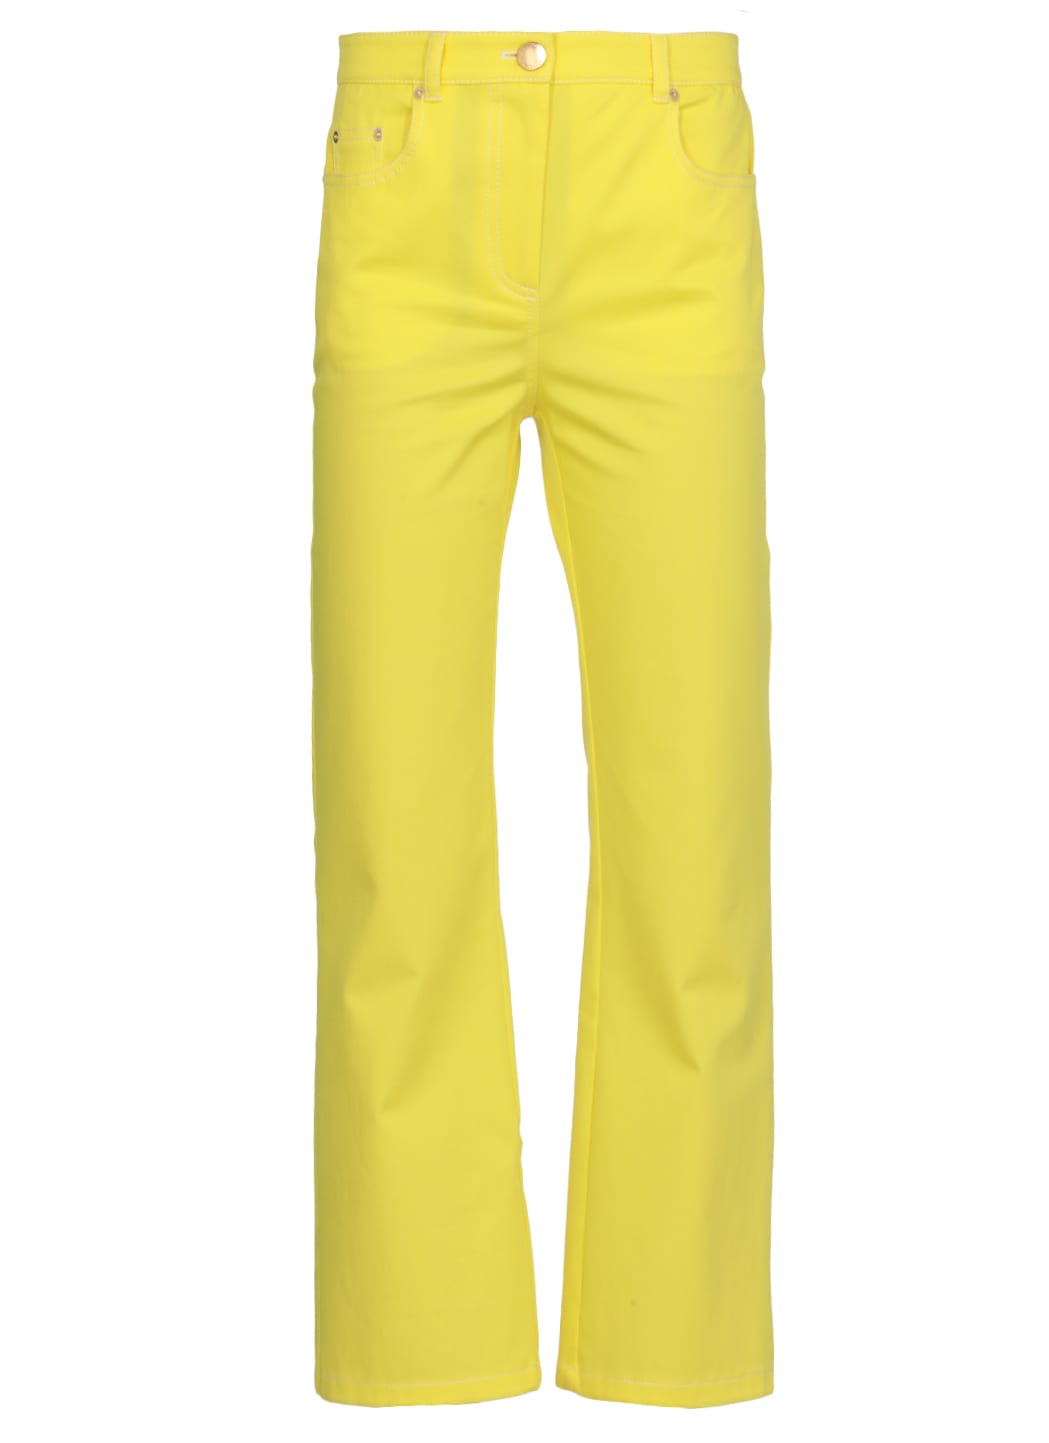 Boutique Moschino Cotton Pants In Yellow